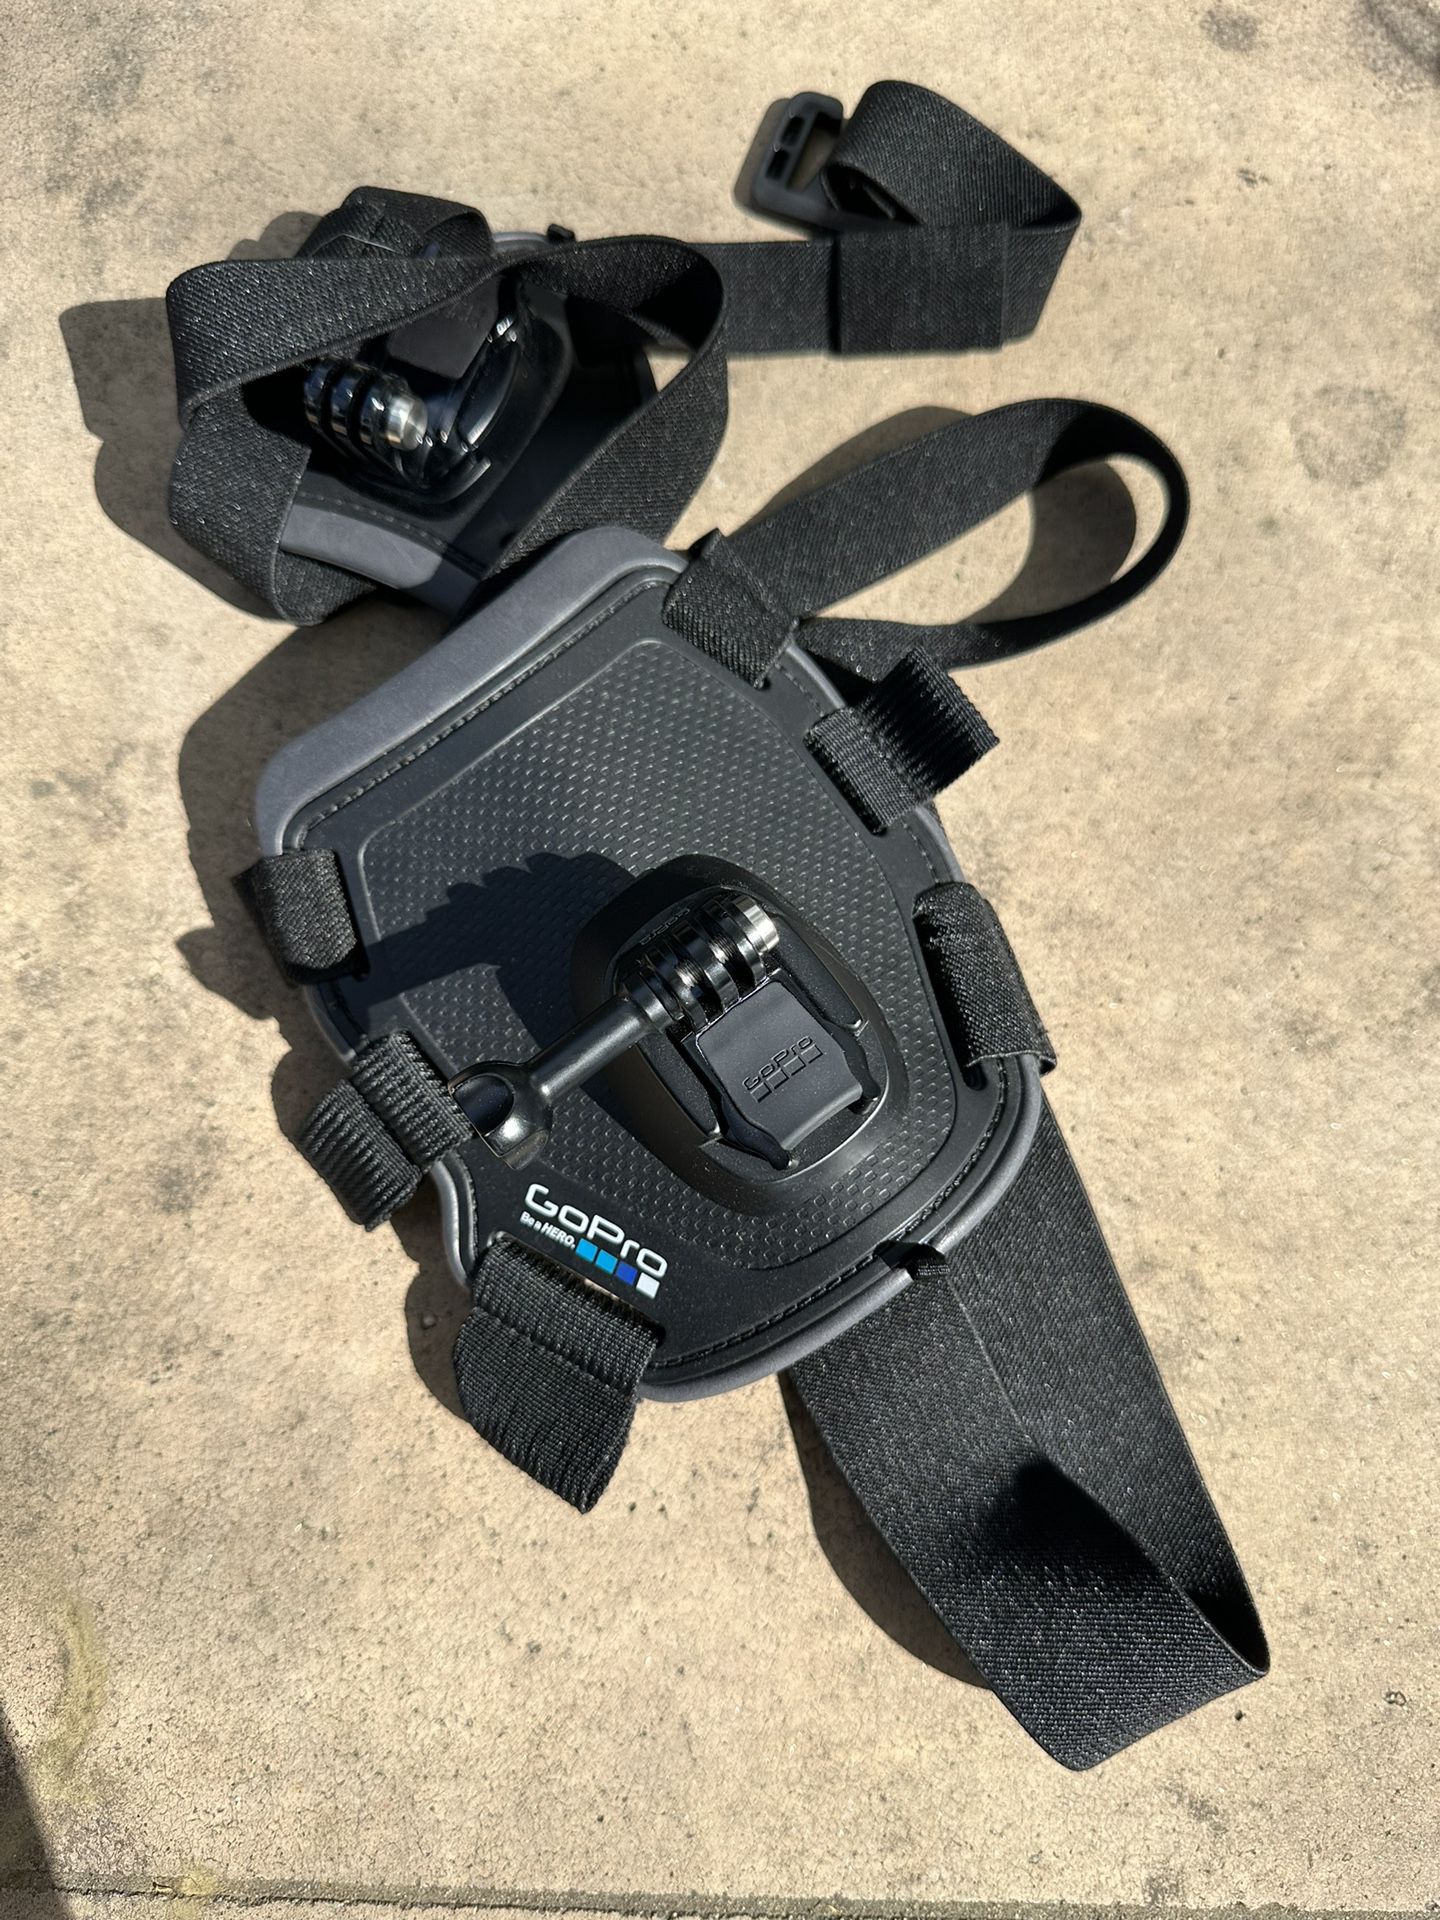 GoPro Dog Harness With Mount